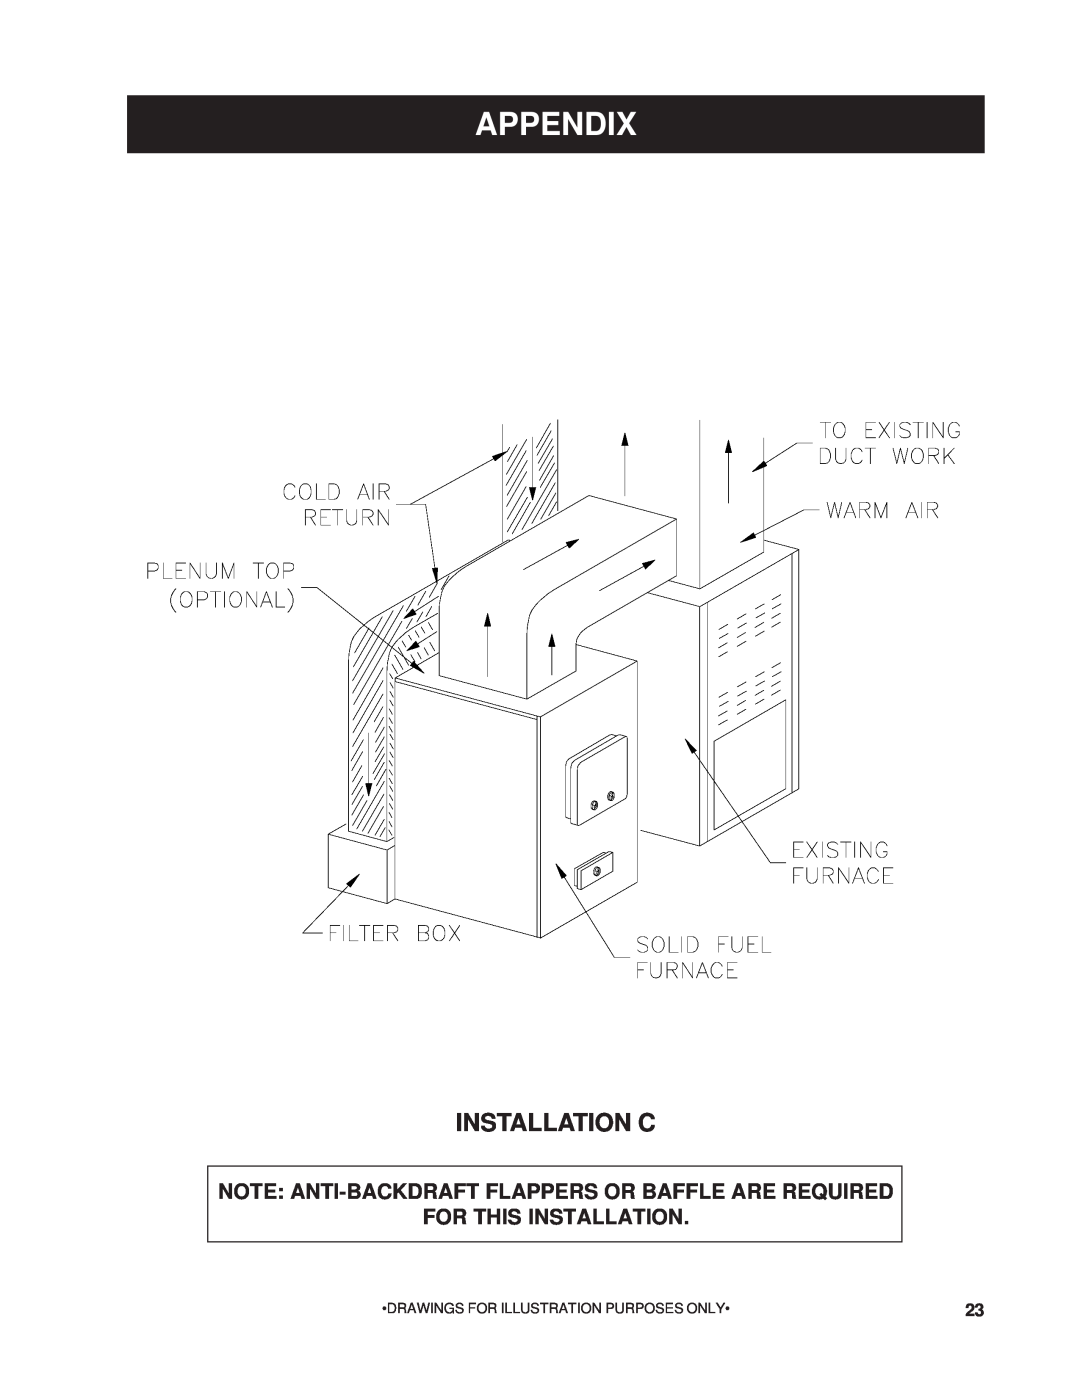 United States Stove 1200Q Installation C, Appendix, For This Installation, Drawings For Illustration Purposes Only 